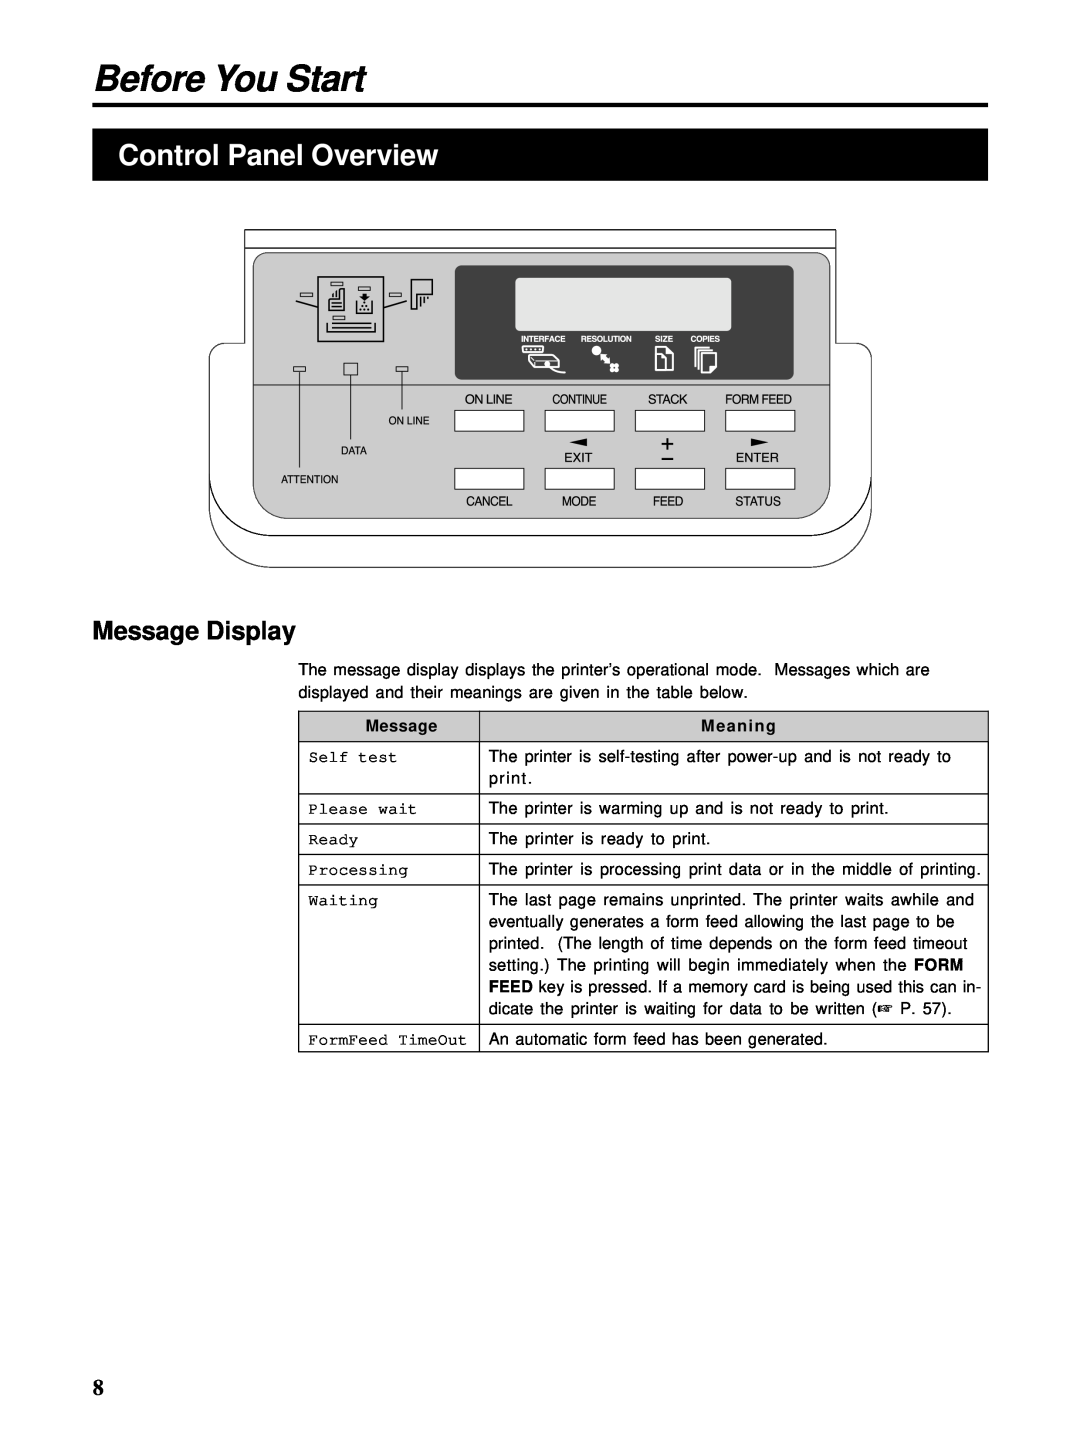 HP Ci 1100 manual Control Panel Overview, Message Display, Before You Start, Ready PAR 600 A4 